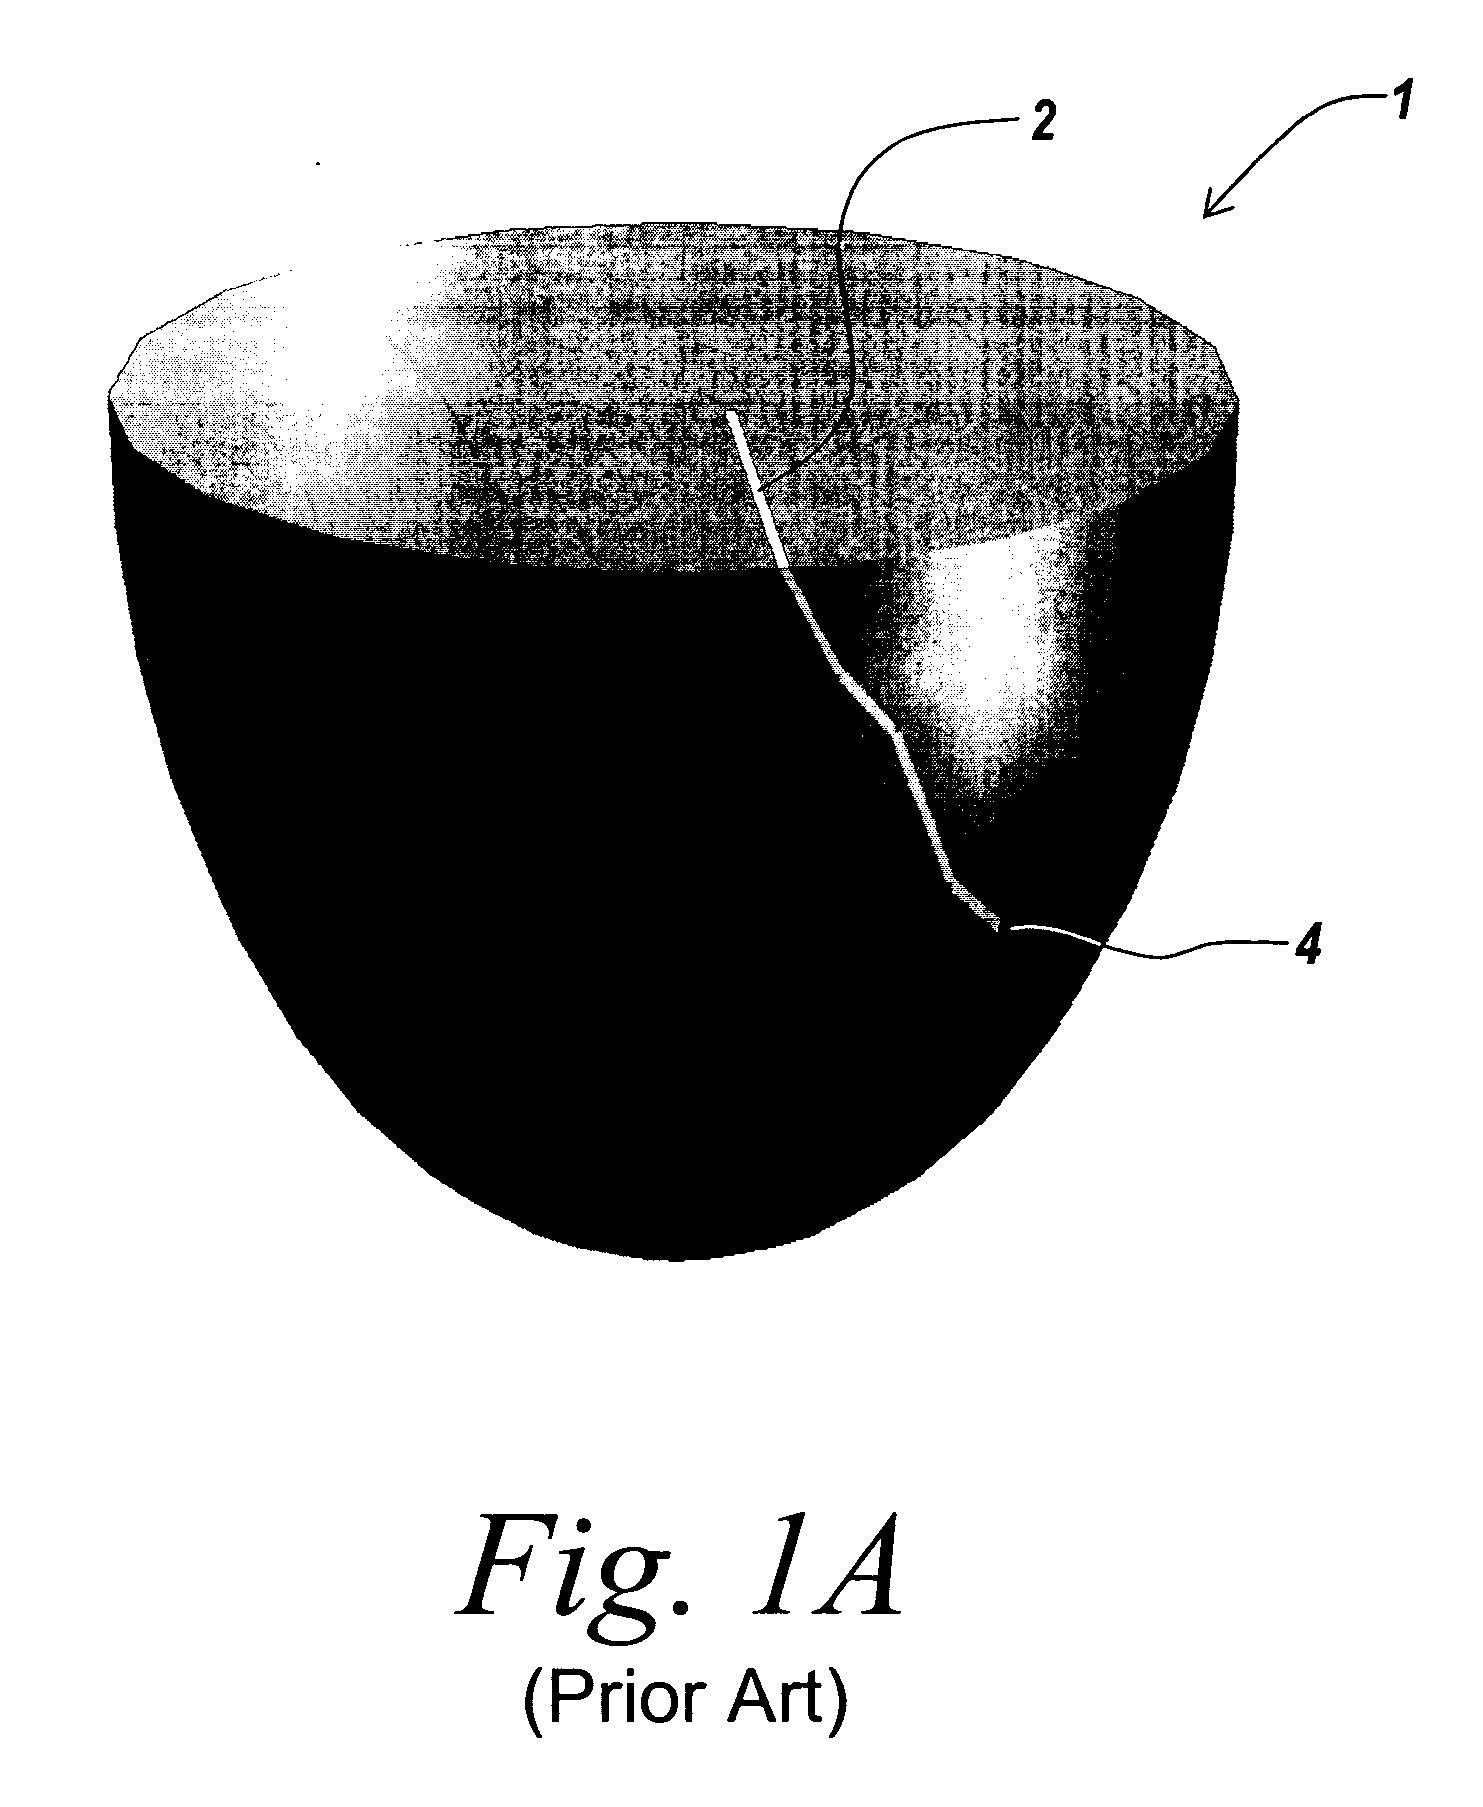 System and method for performing process visualization